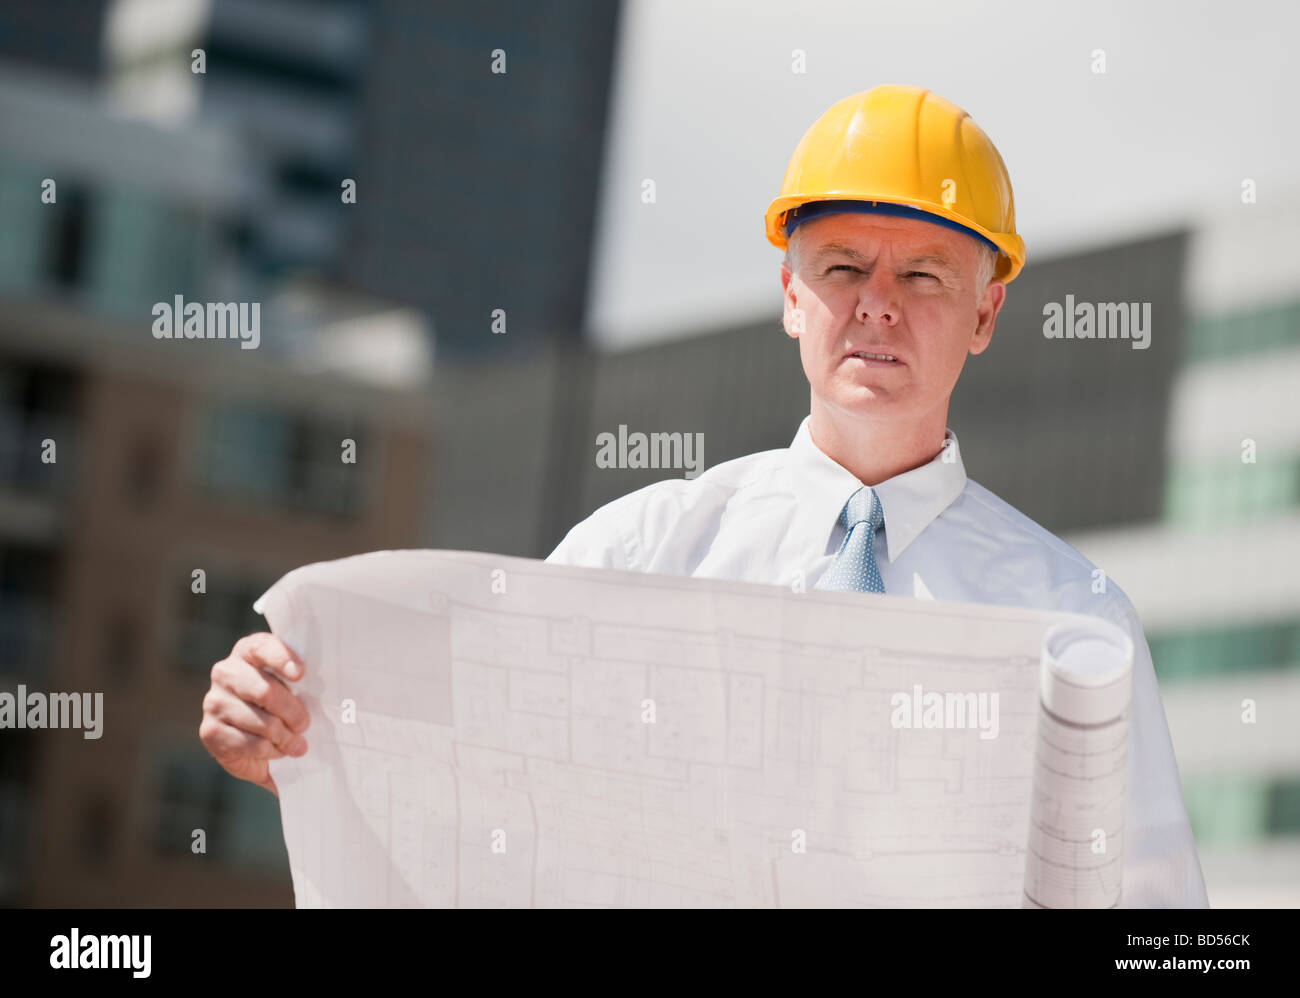 An architect holding plans outdoors Stock Photo